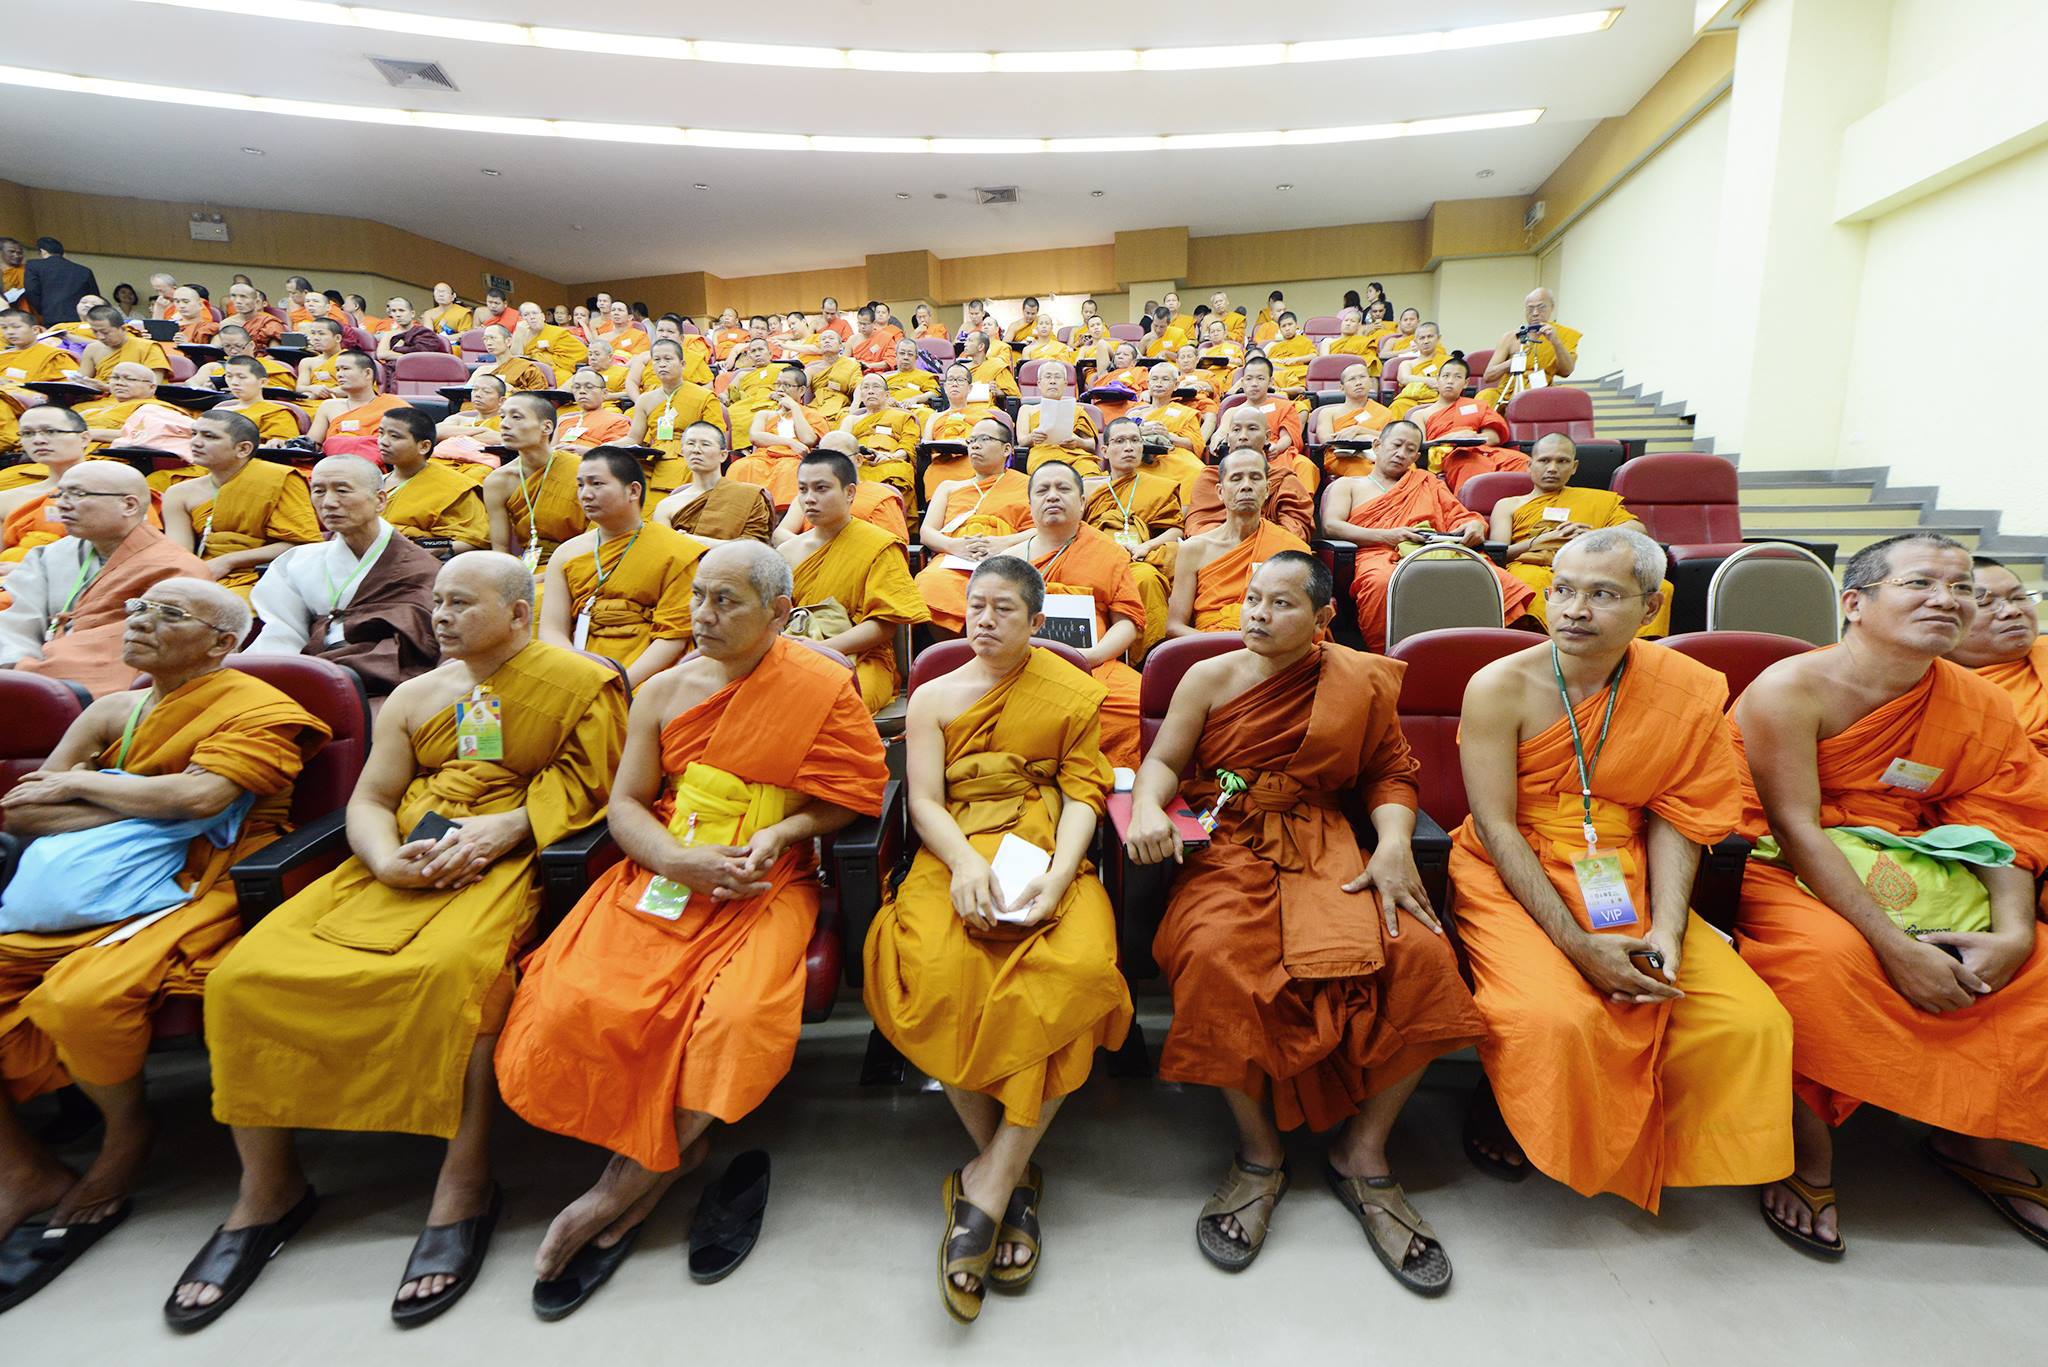 International Council for the Day of Vesak. Main theme: Buddhism and World Crisis